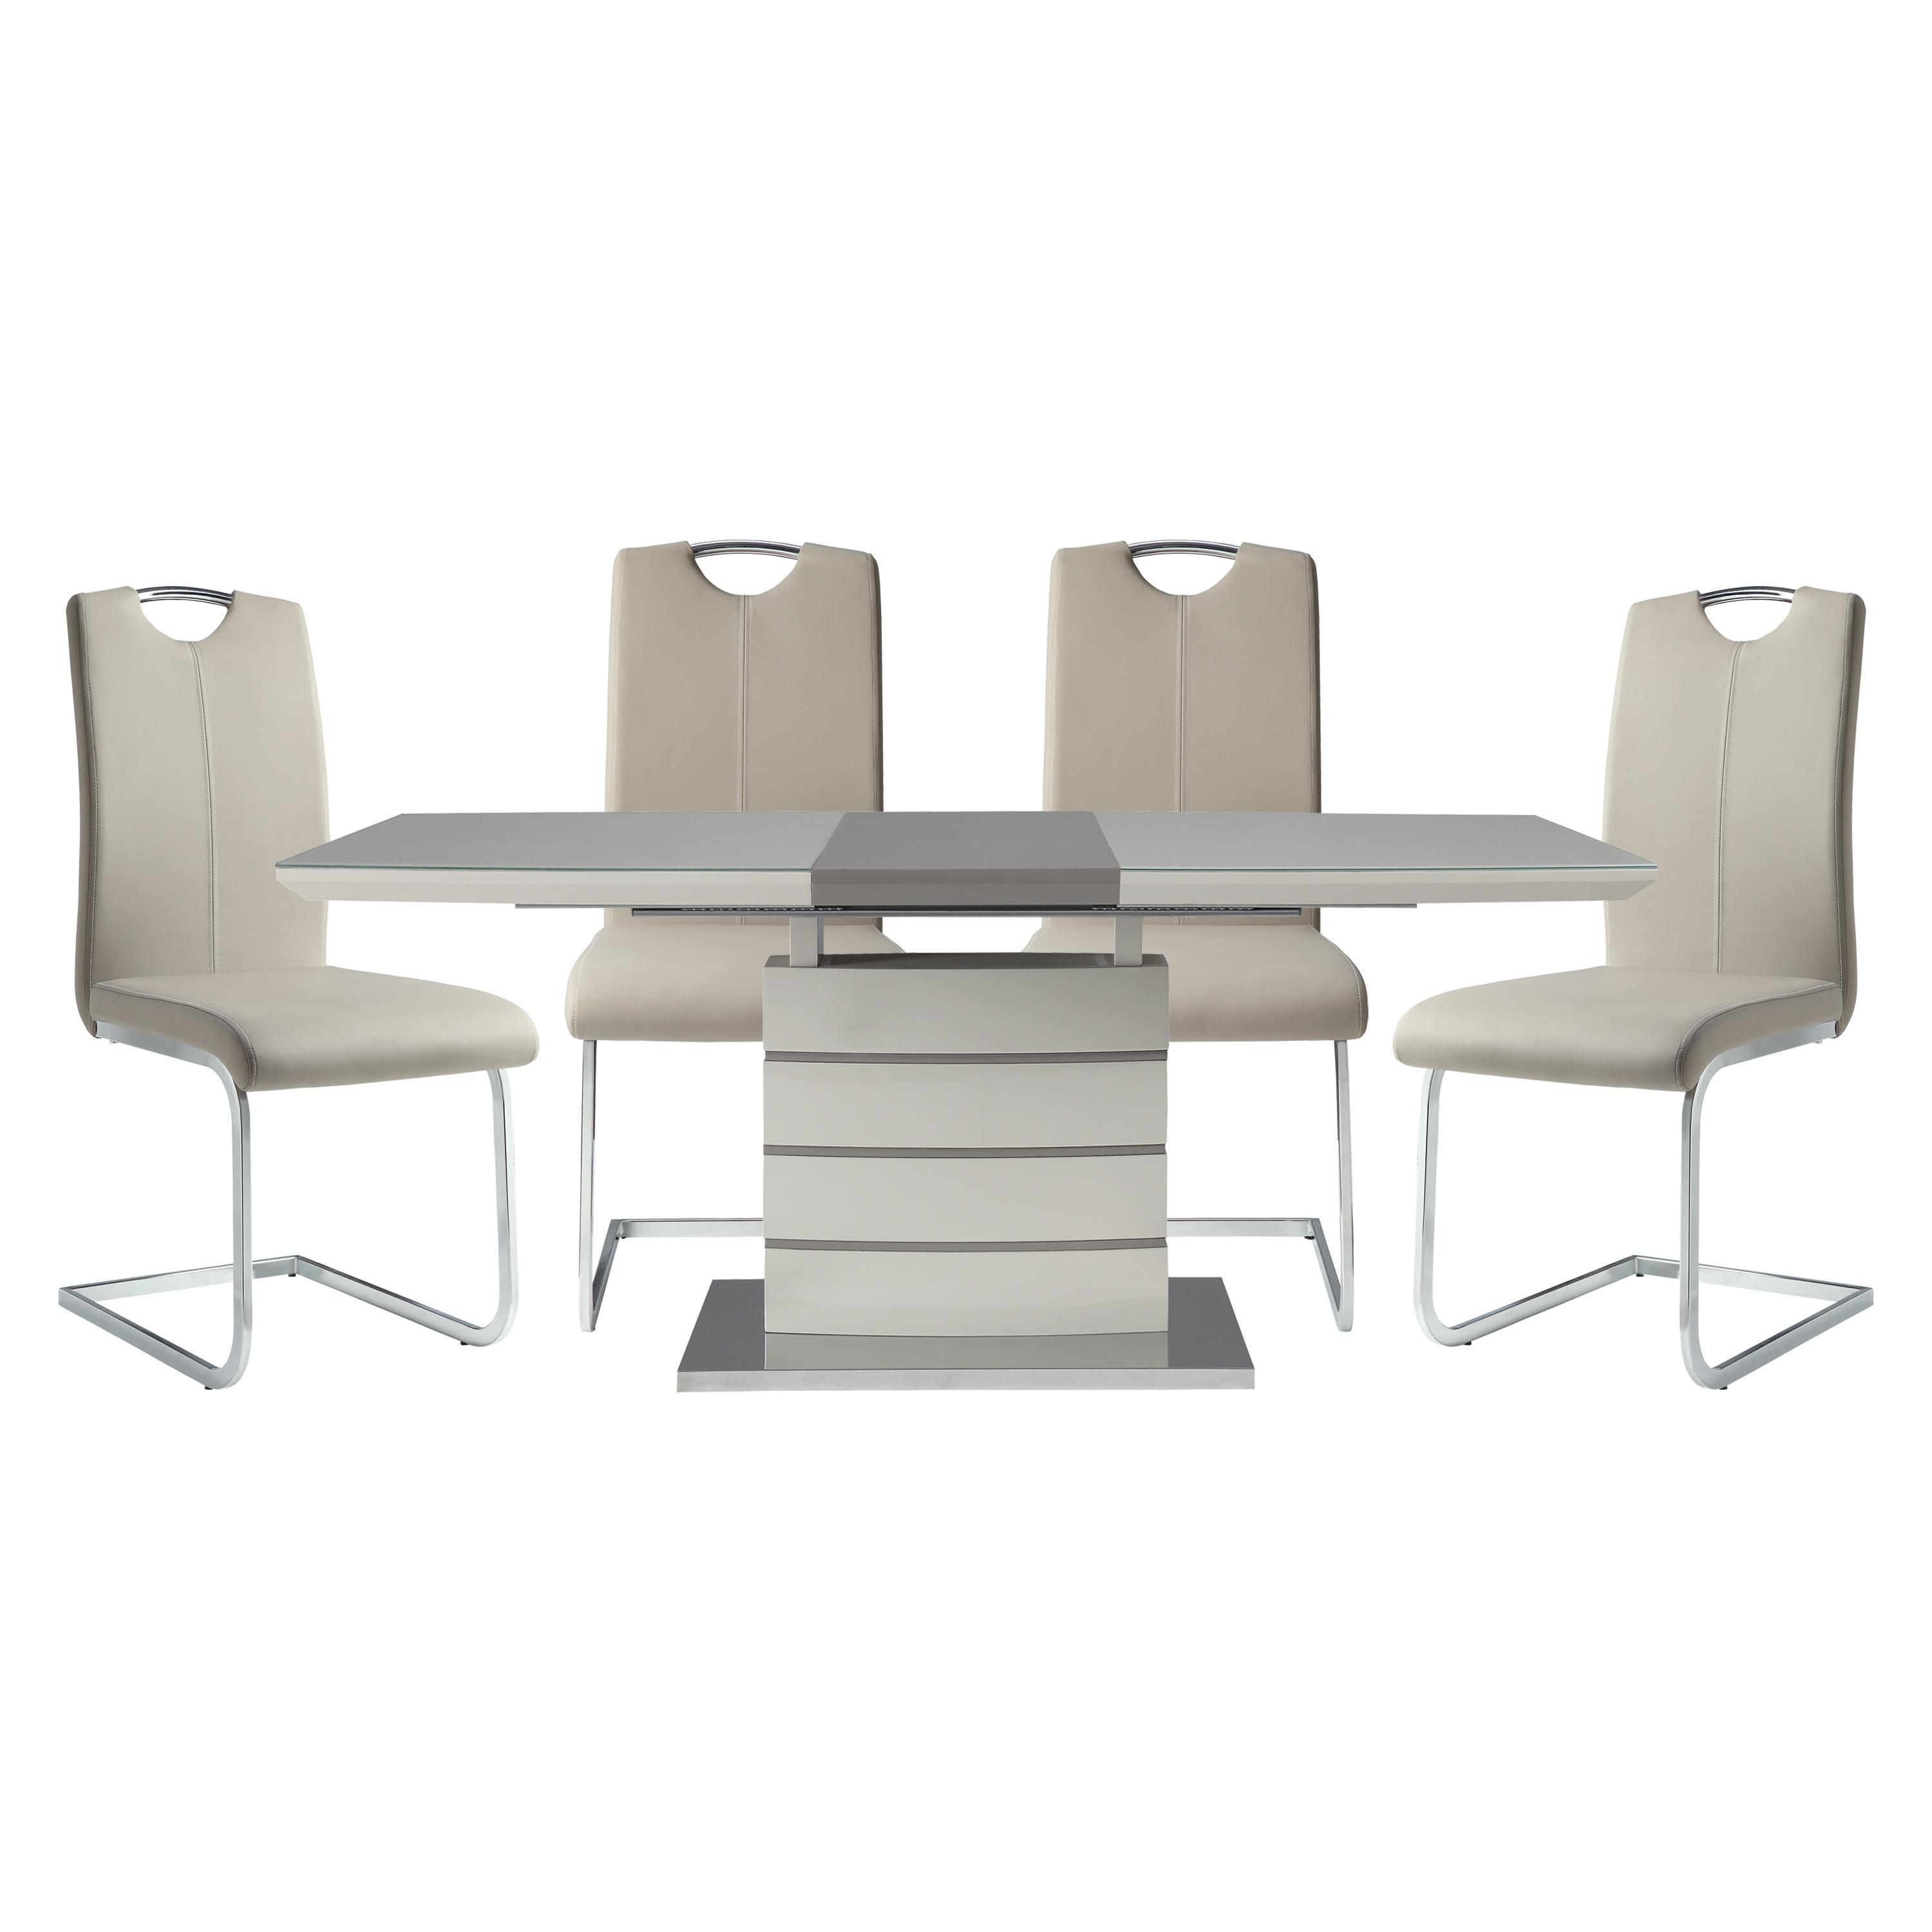 

    
Contemporary High Gloss White Wood Dining Room Set 5pcs Homelegance 5599-71* Glissand
